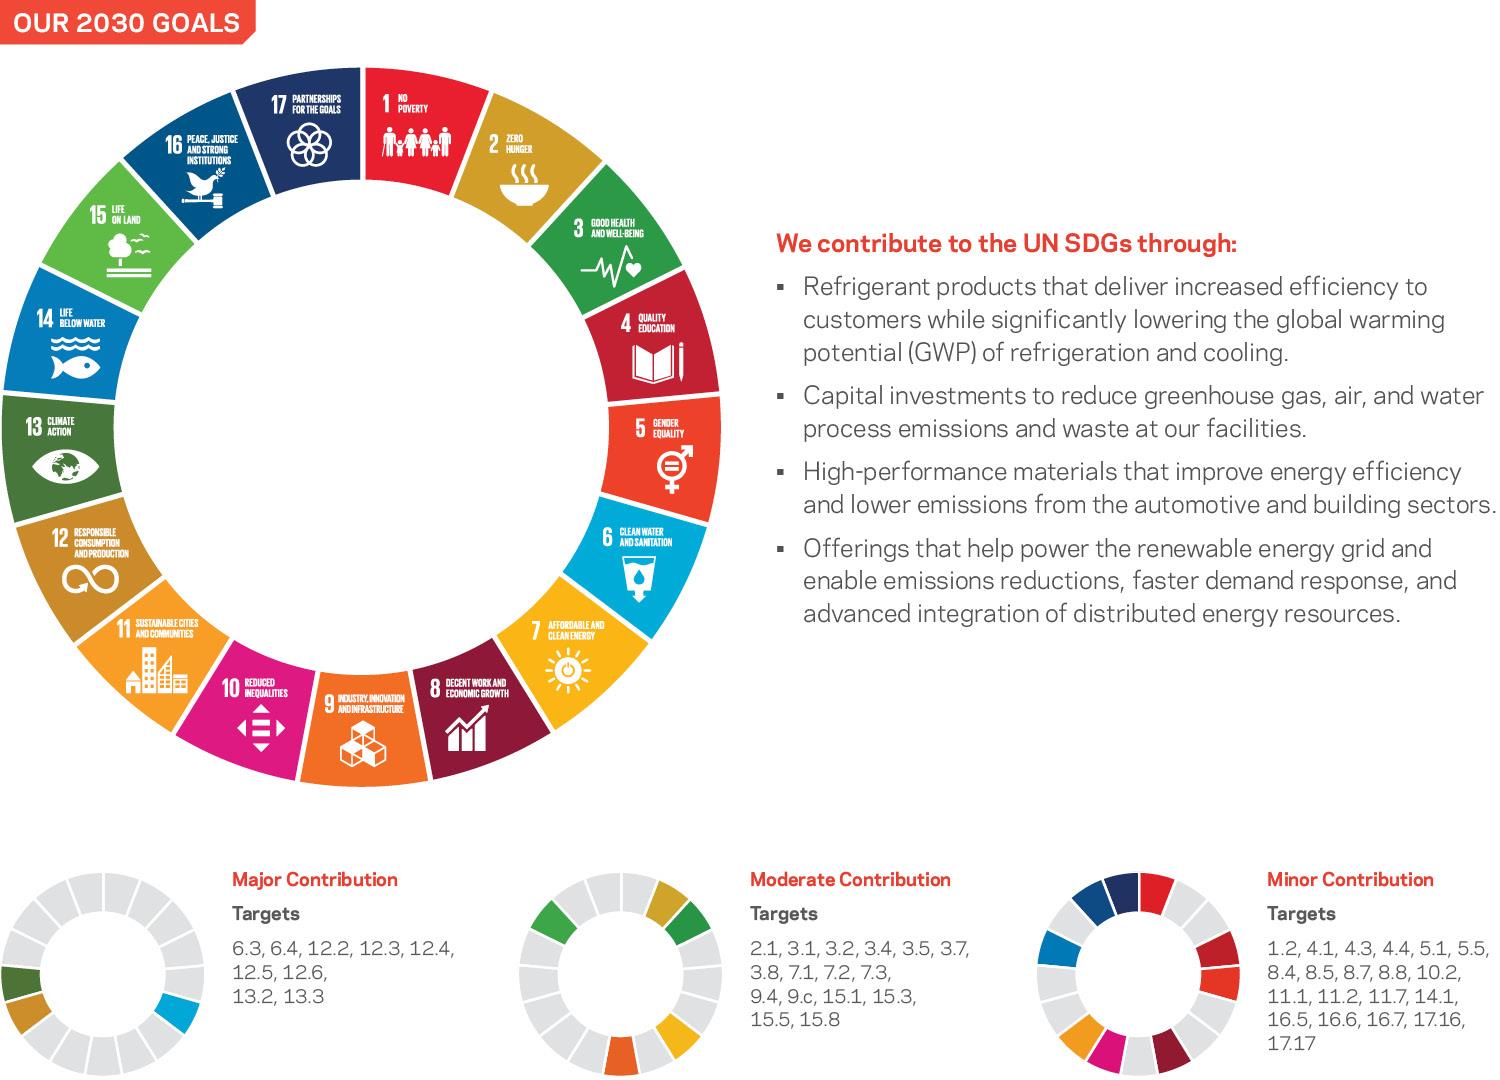 Our contributions to the UN SDGs.